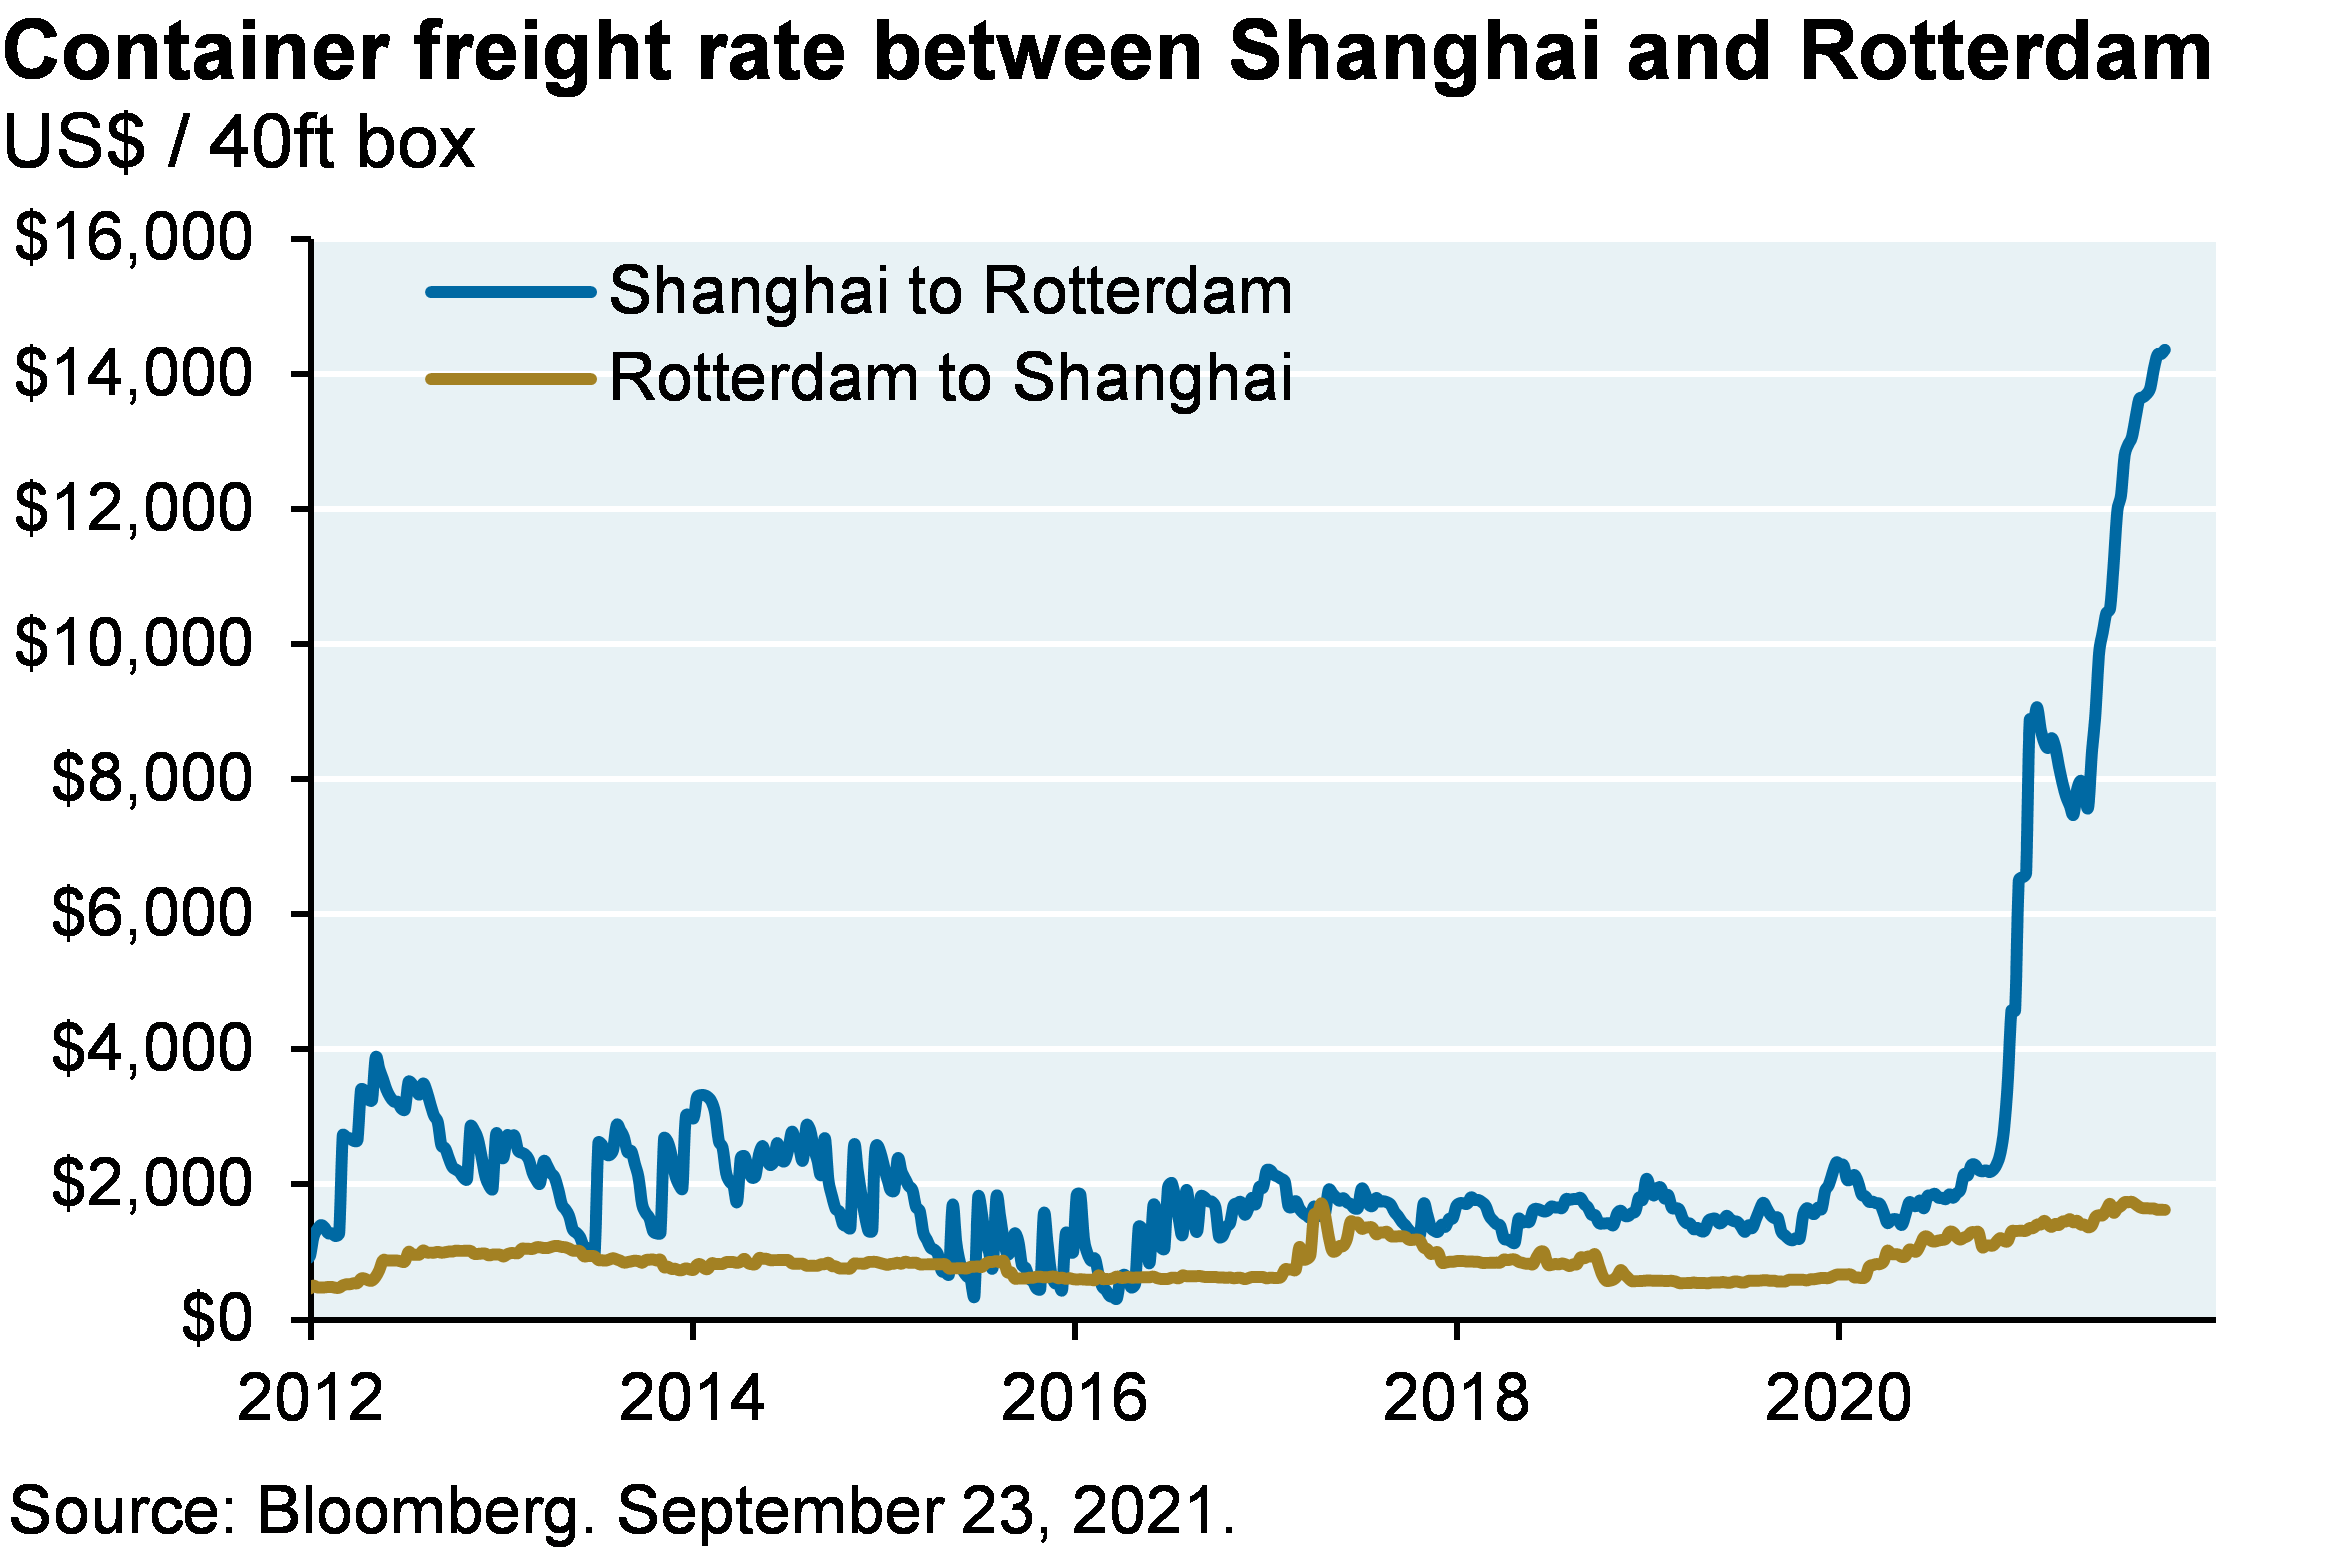 Container freight rate between Shanghai and Rotterdam